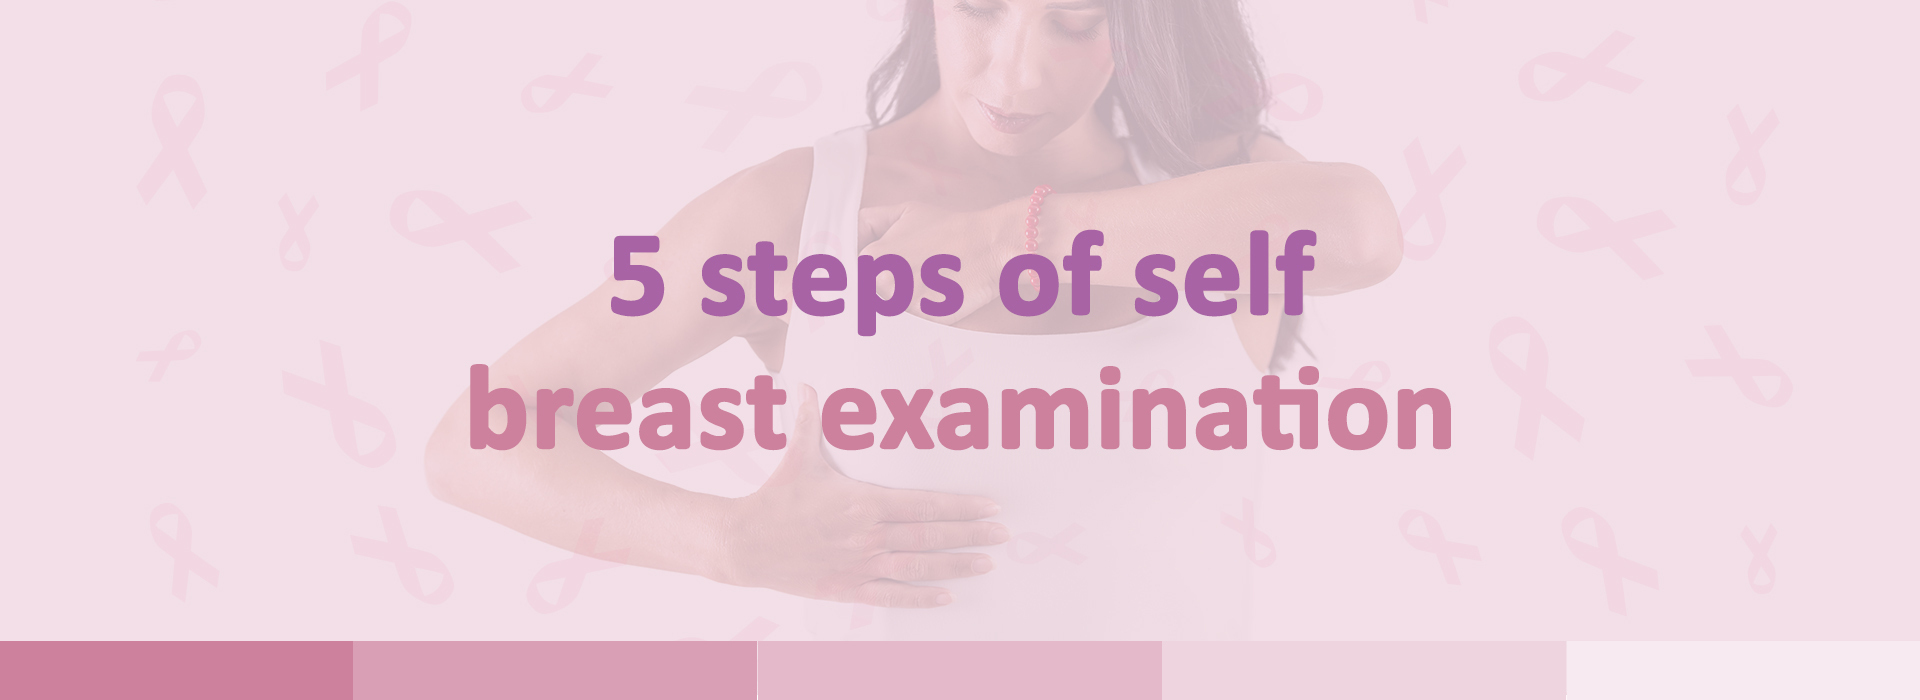 5 Steps of Self Breast Examination: Prevent the Dreaded Disease and Save Yourself!